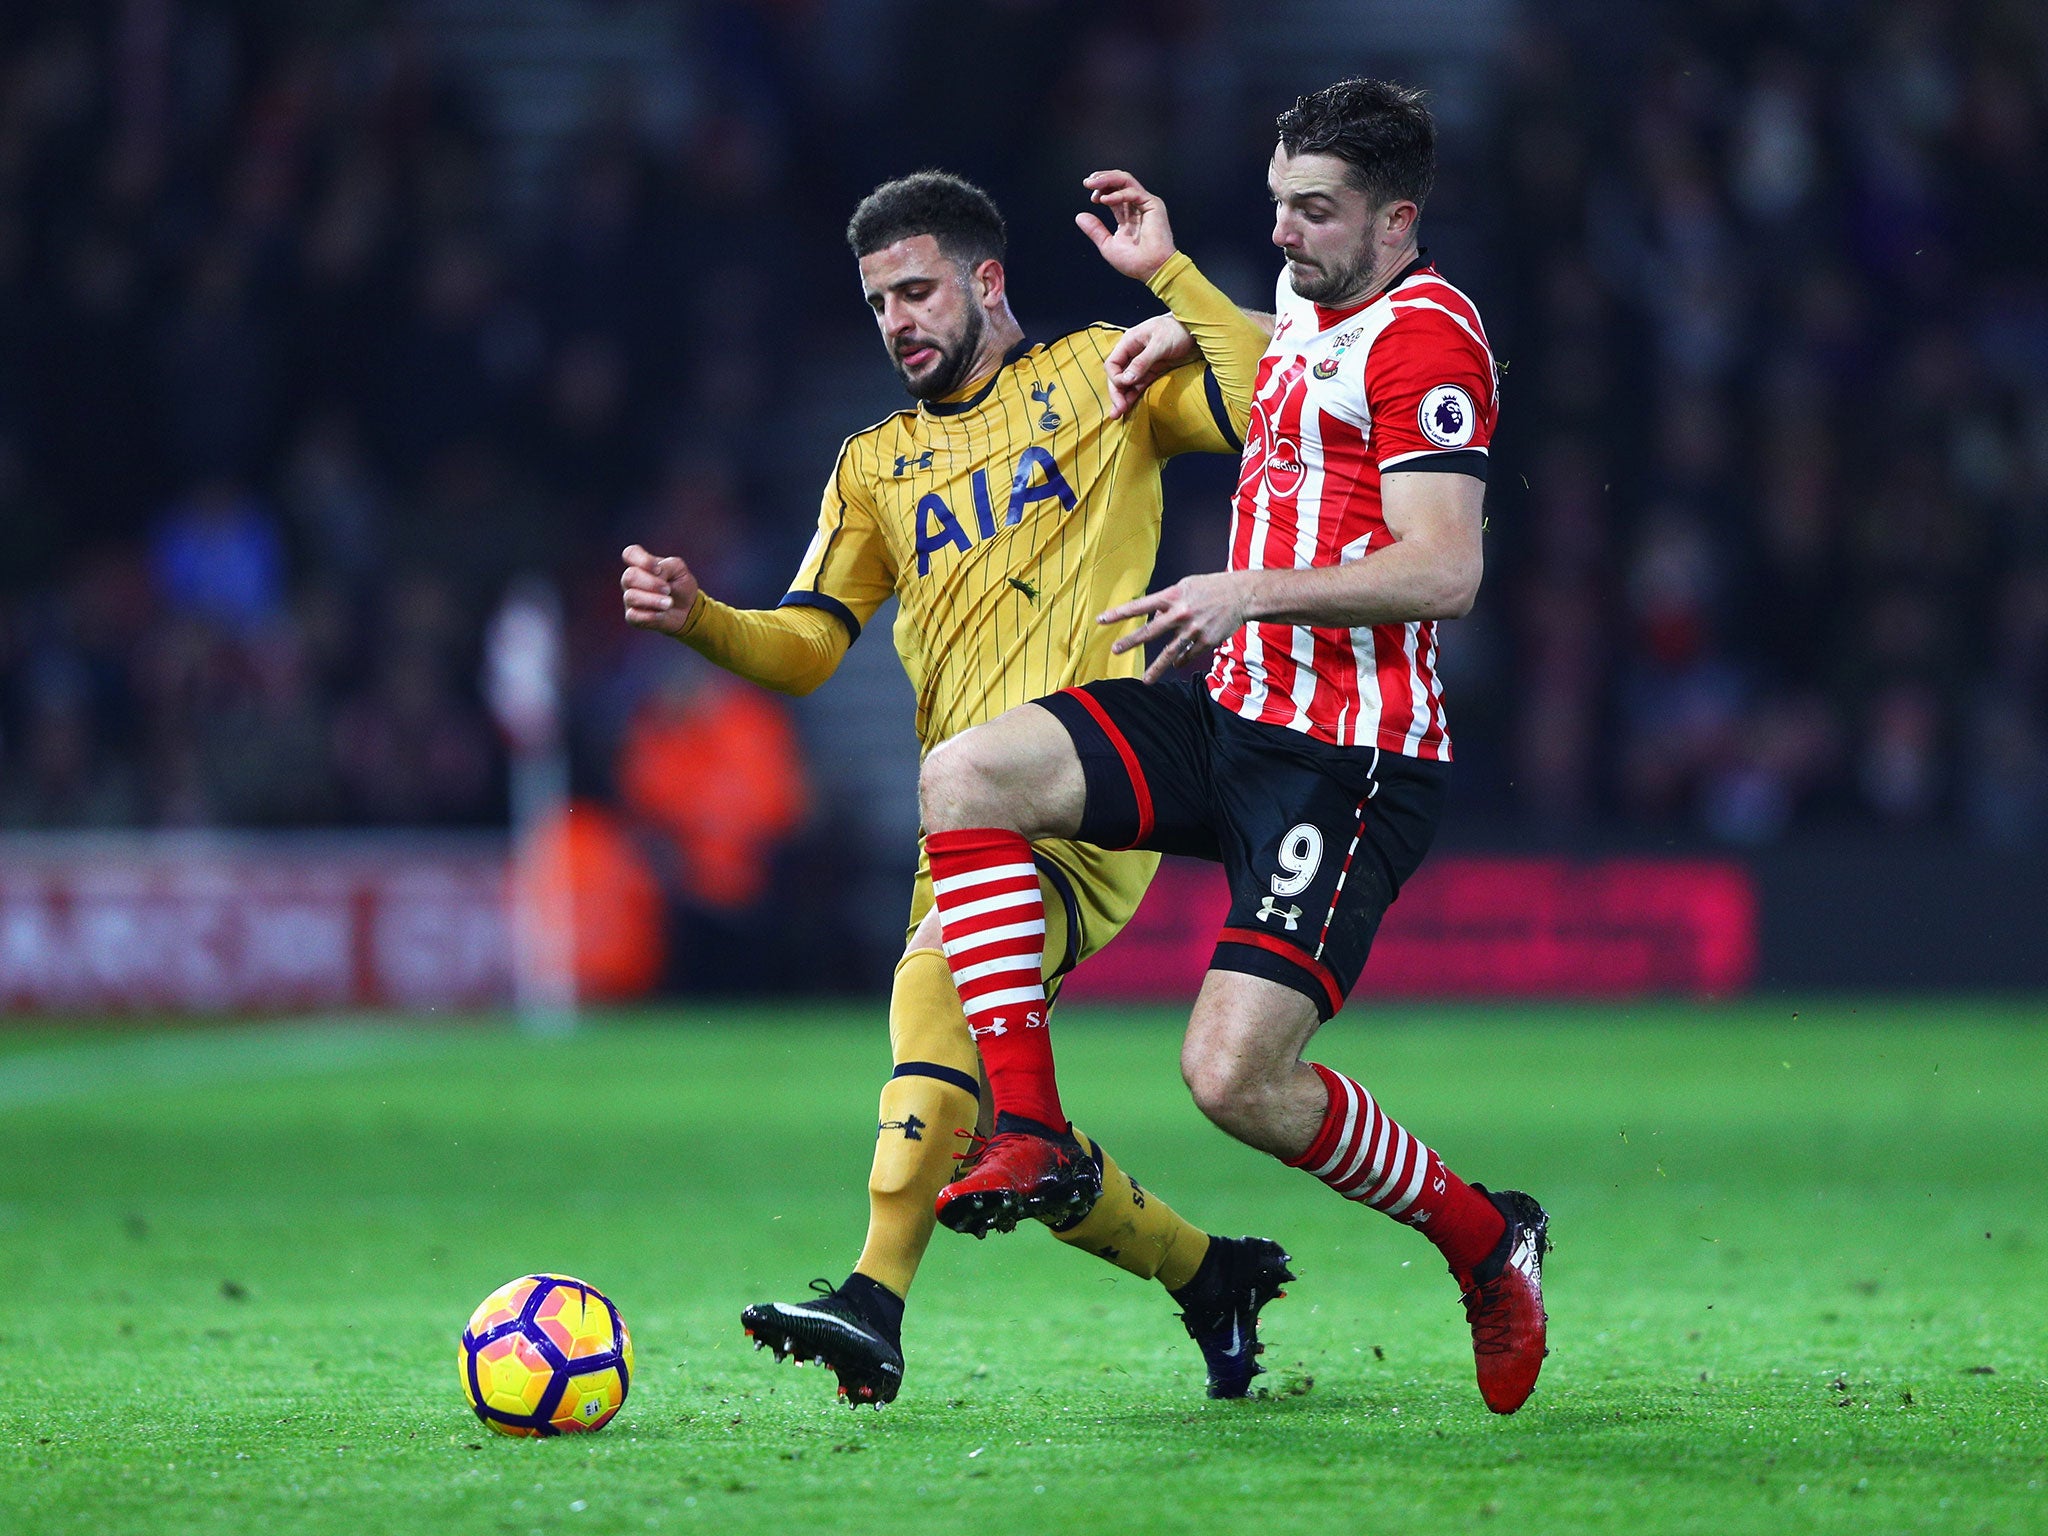 Jay Rodriguez tussles for possession with Kyle Walker